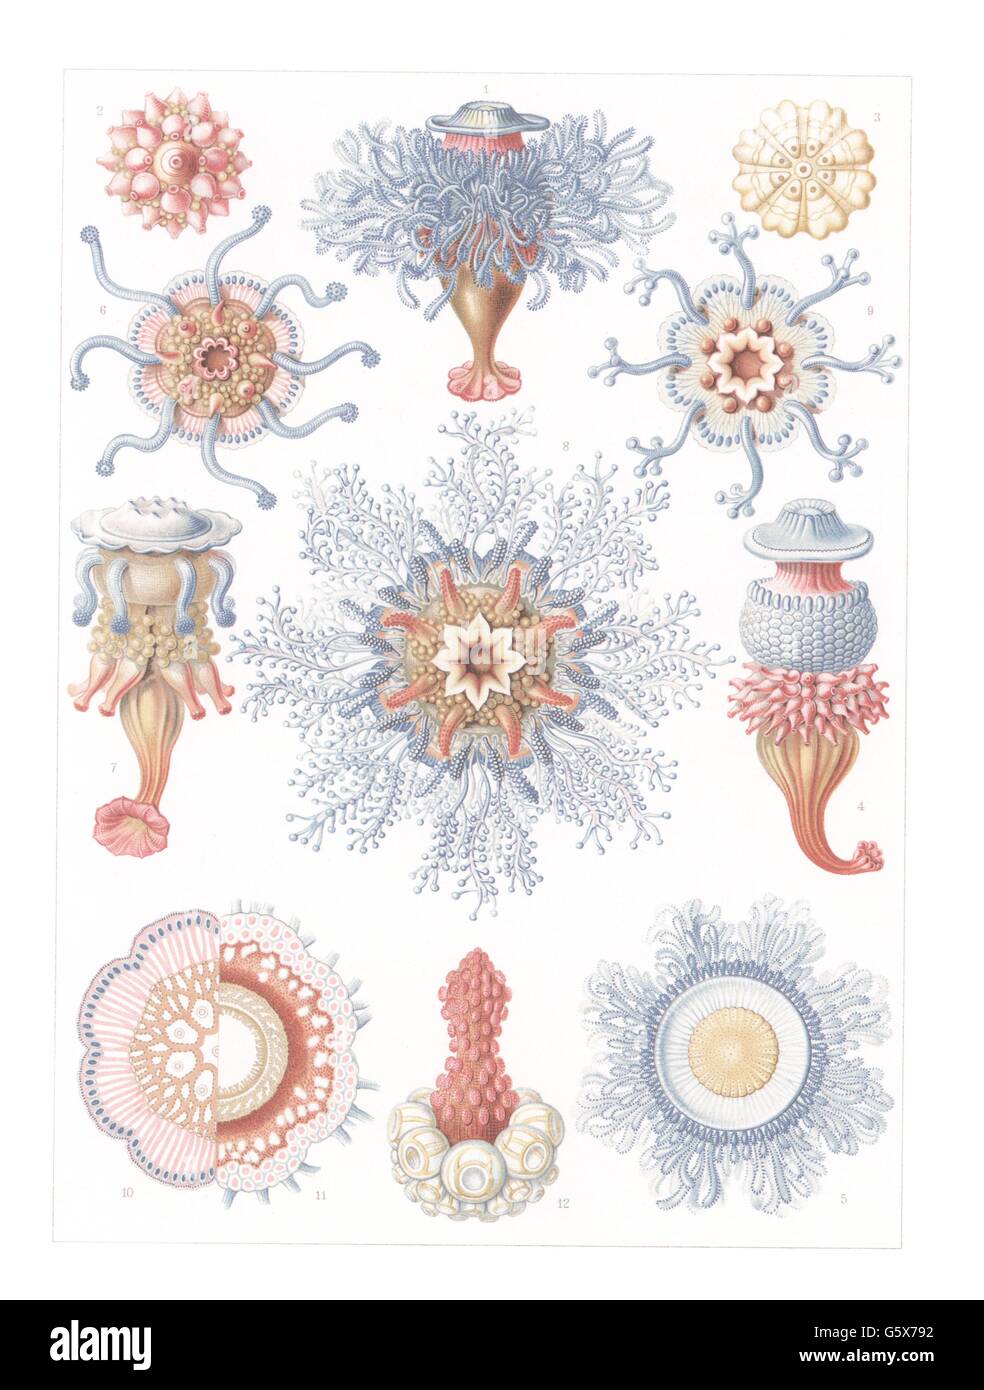 zoologie / Tiere, cnidaria, Siphonophores (Siphonophorae), Farblithographie, aus: Ernst Haeckel, 'Kunstformen der Natur', Leipzig - Wien, 1899 - 1904, Additional-Rights-Clearences-not available Stockfoto